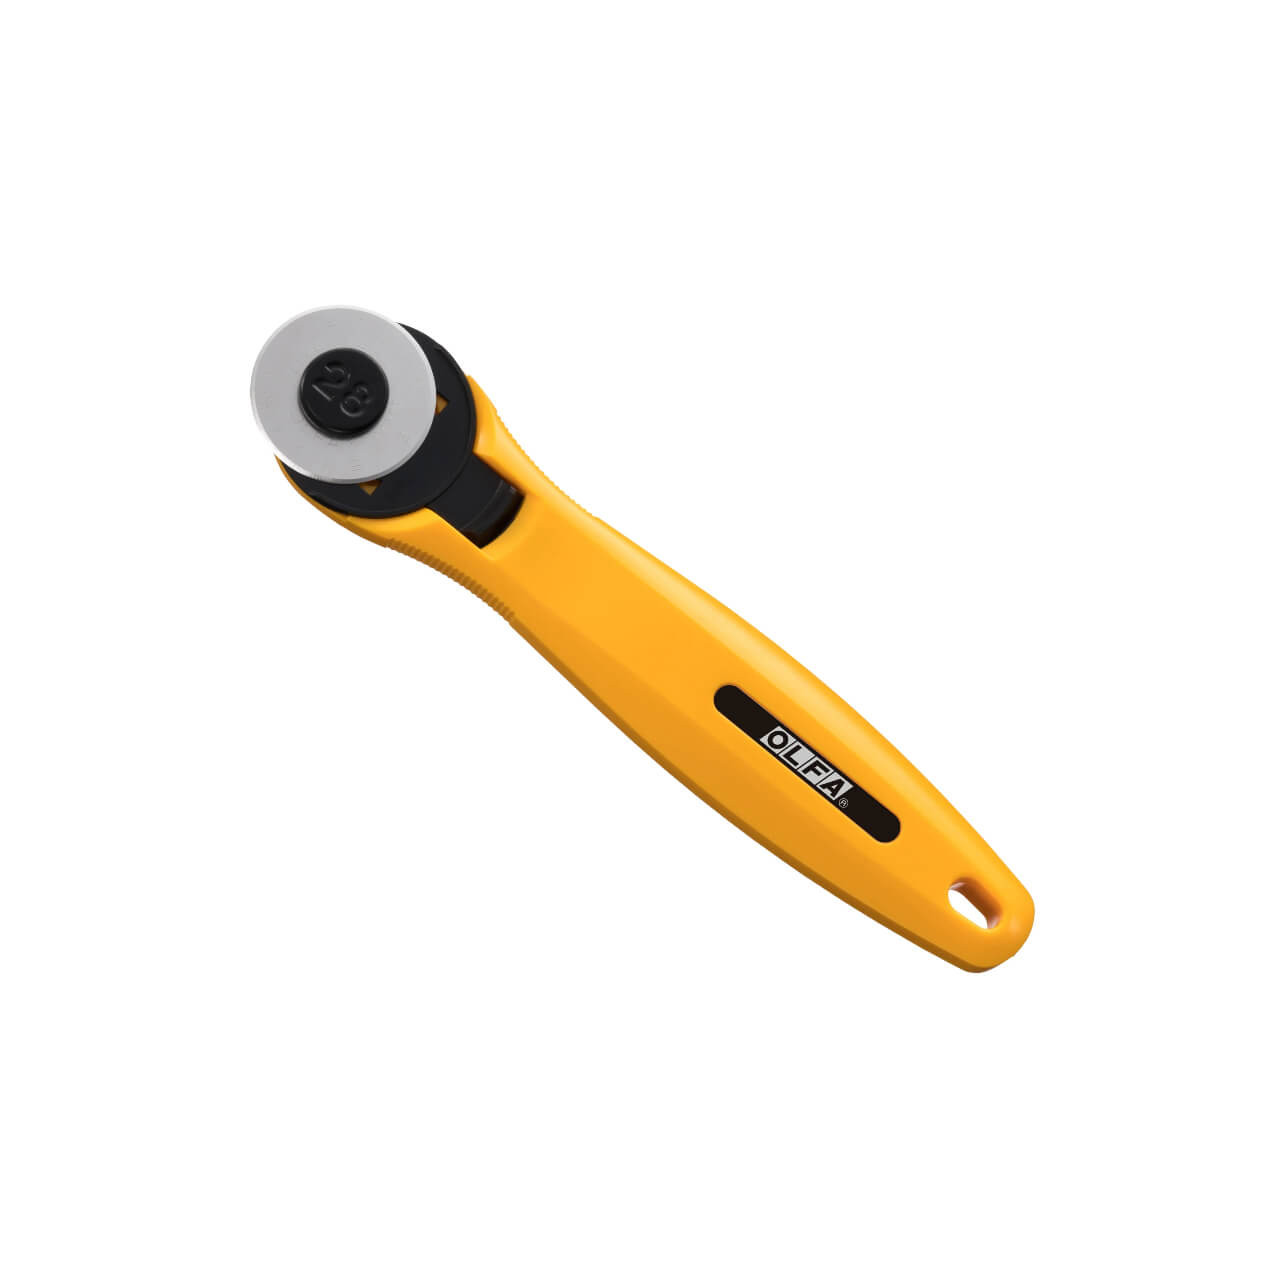 OLFA 28mm Quick-Change Rotary Cutter with the safety cover opened. The cutter is a vibrant yellow handle, black grip, and silver blade, isolated on a white background.